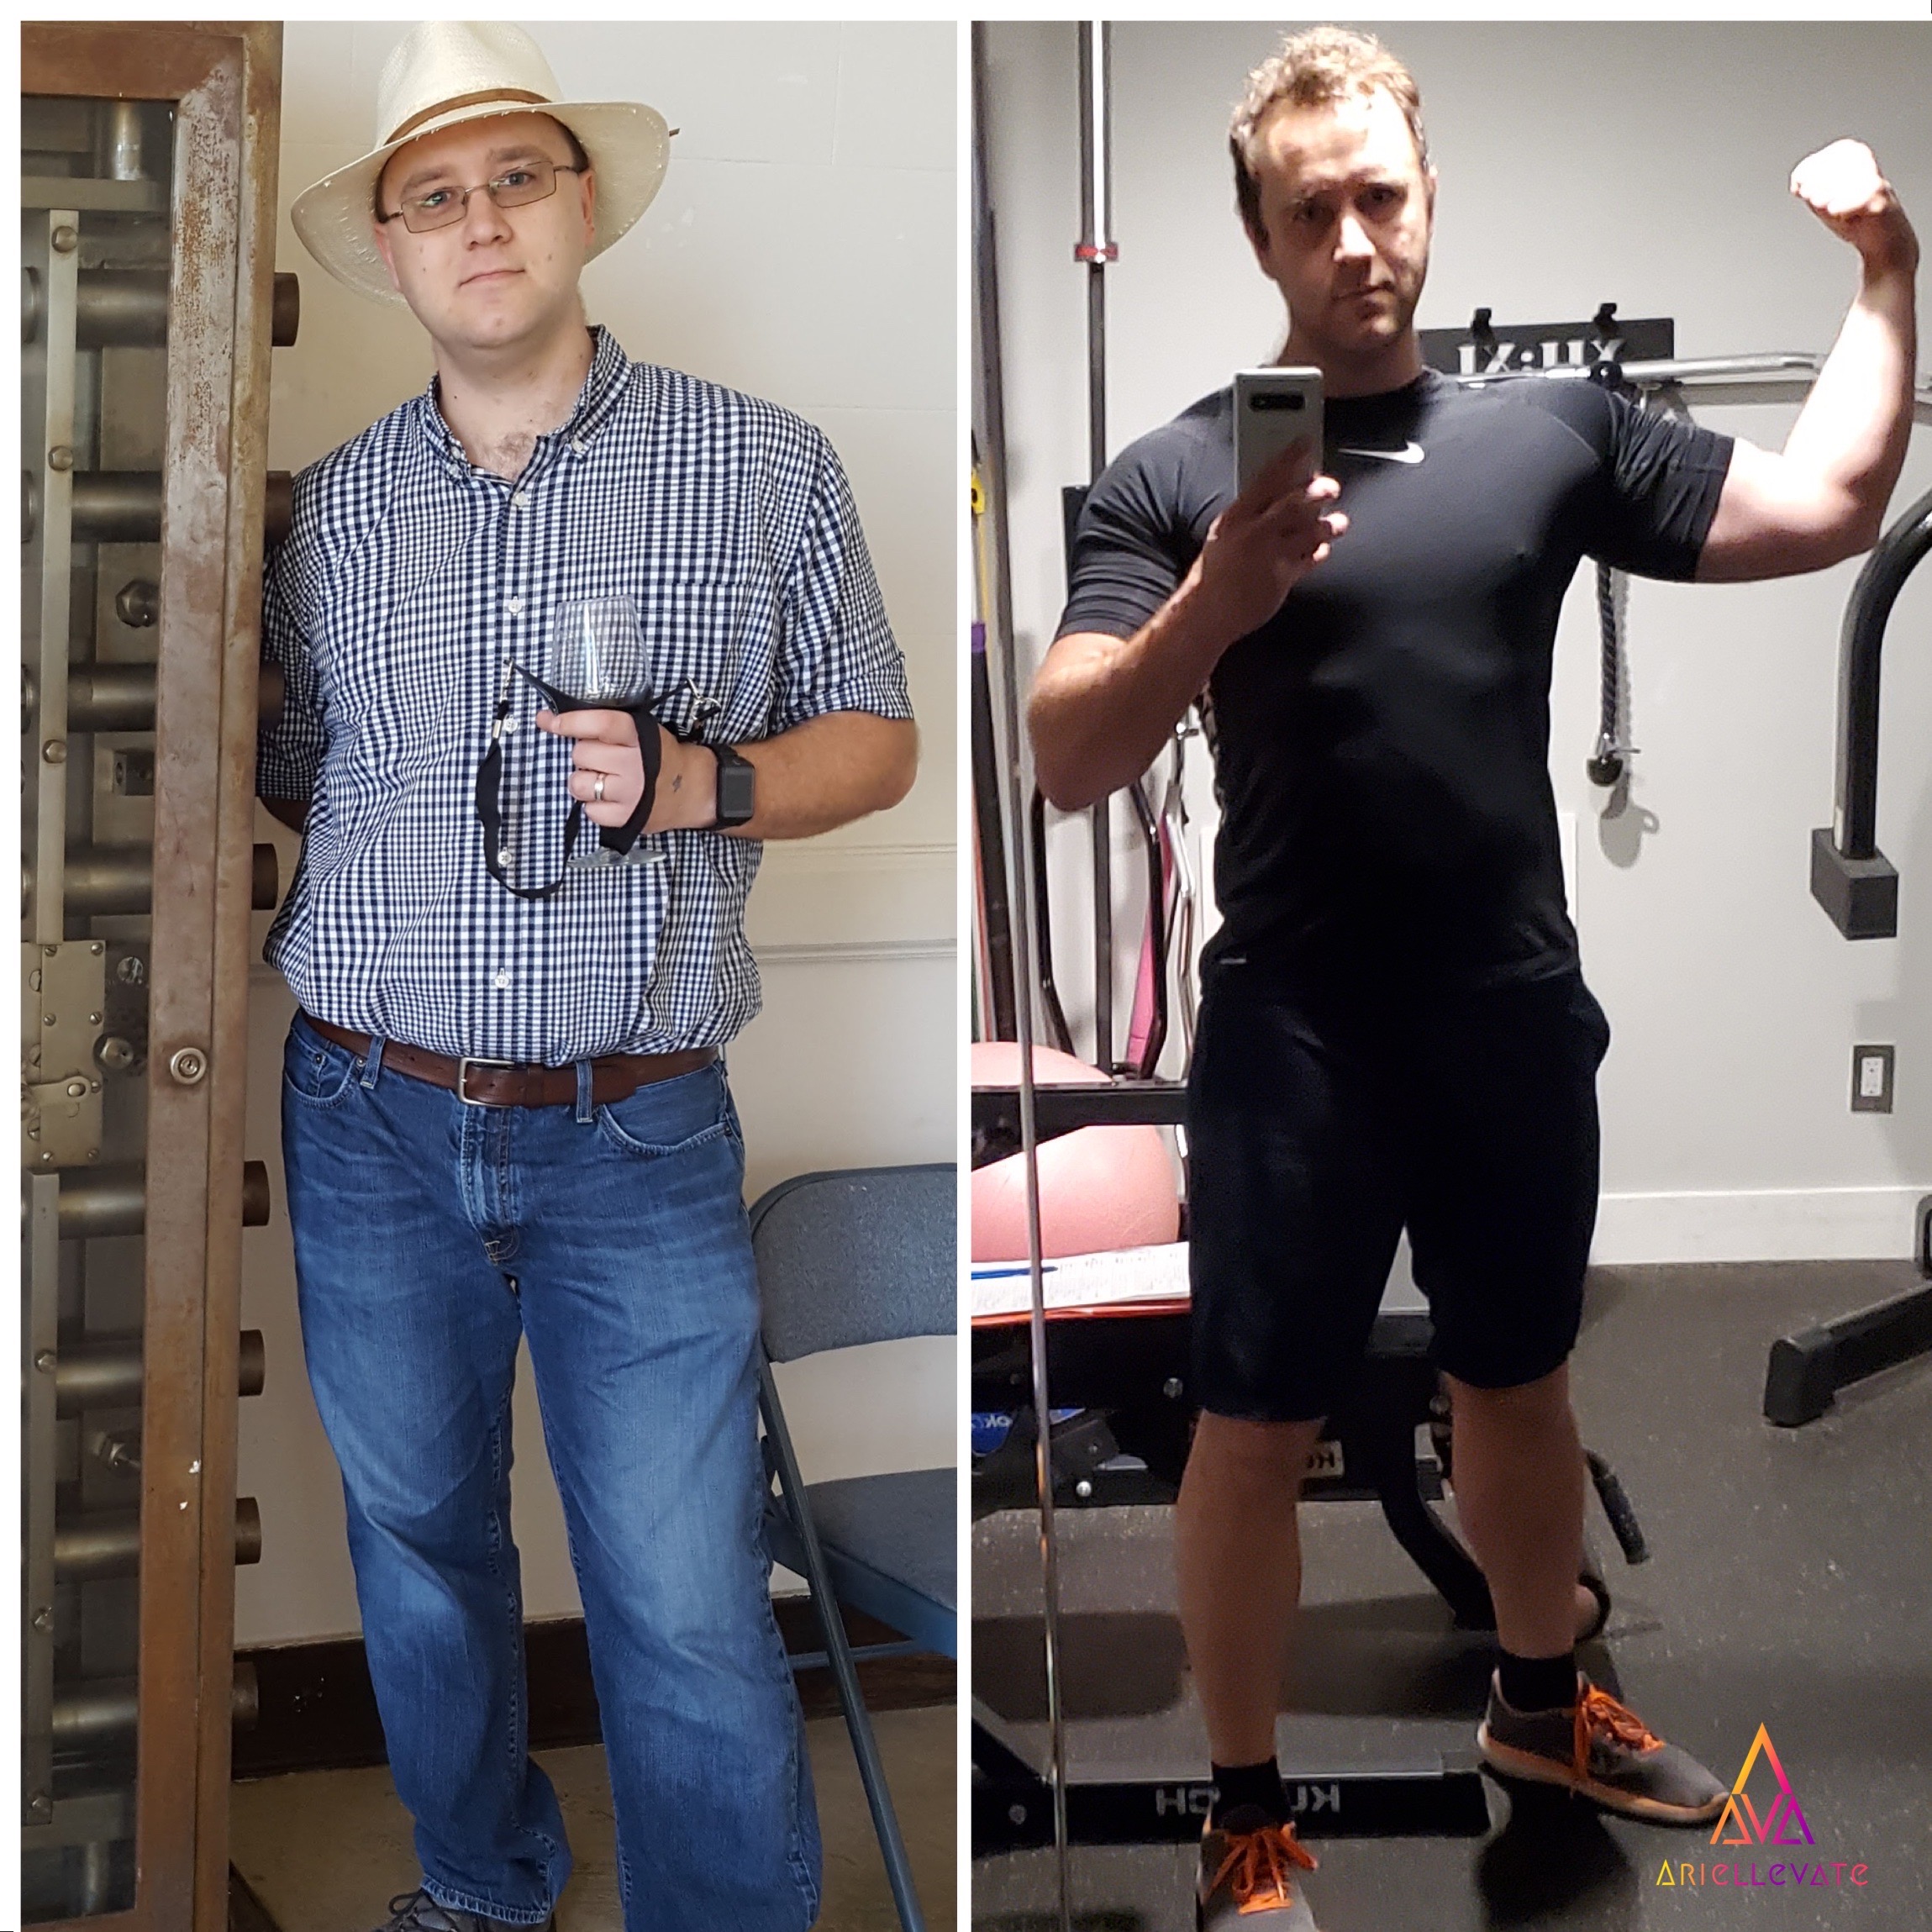 muscle building weight loss transformation